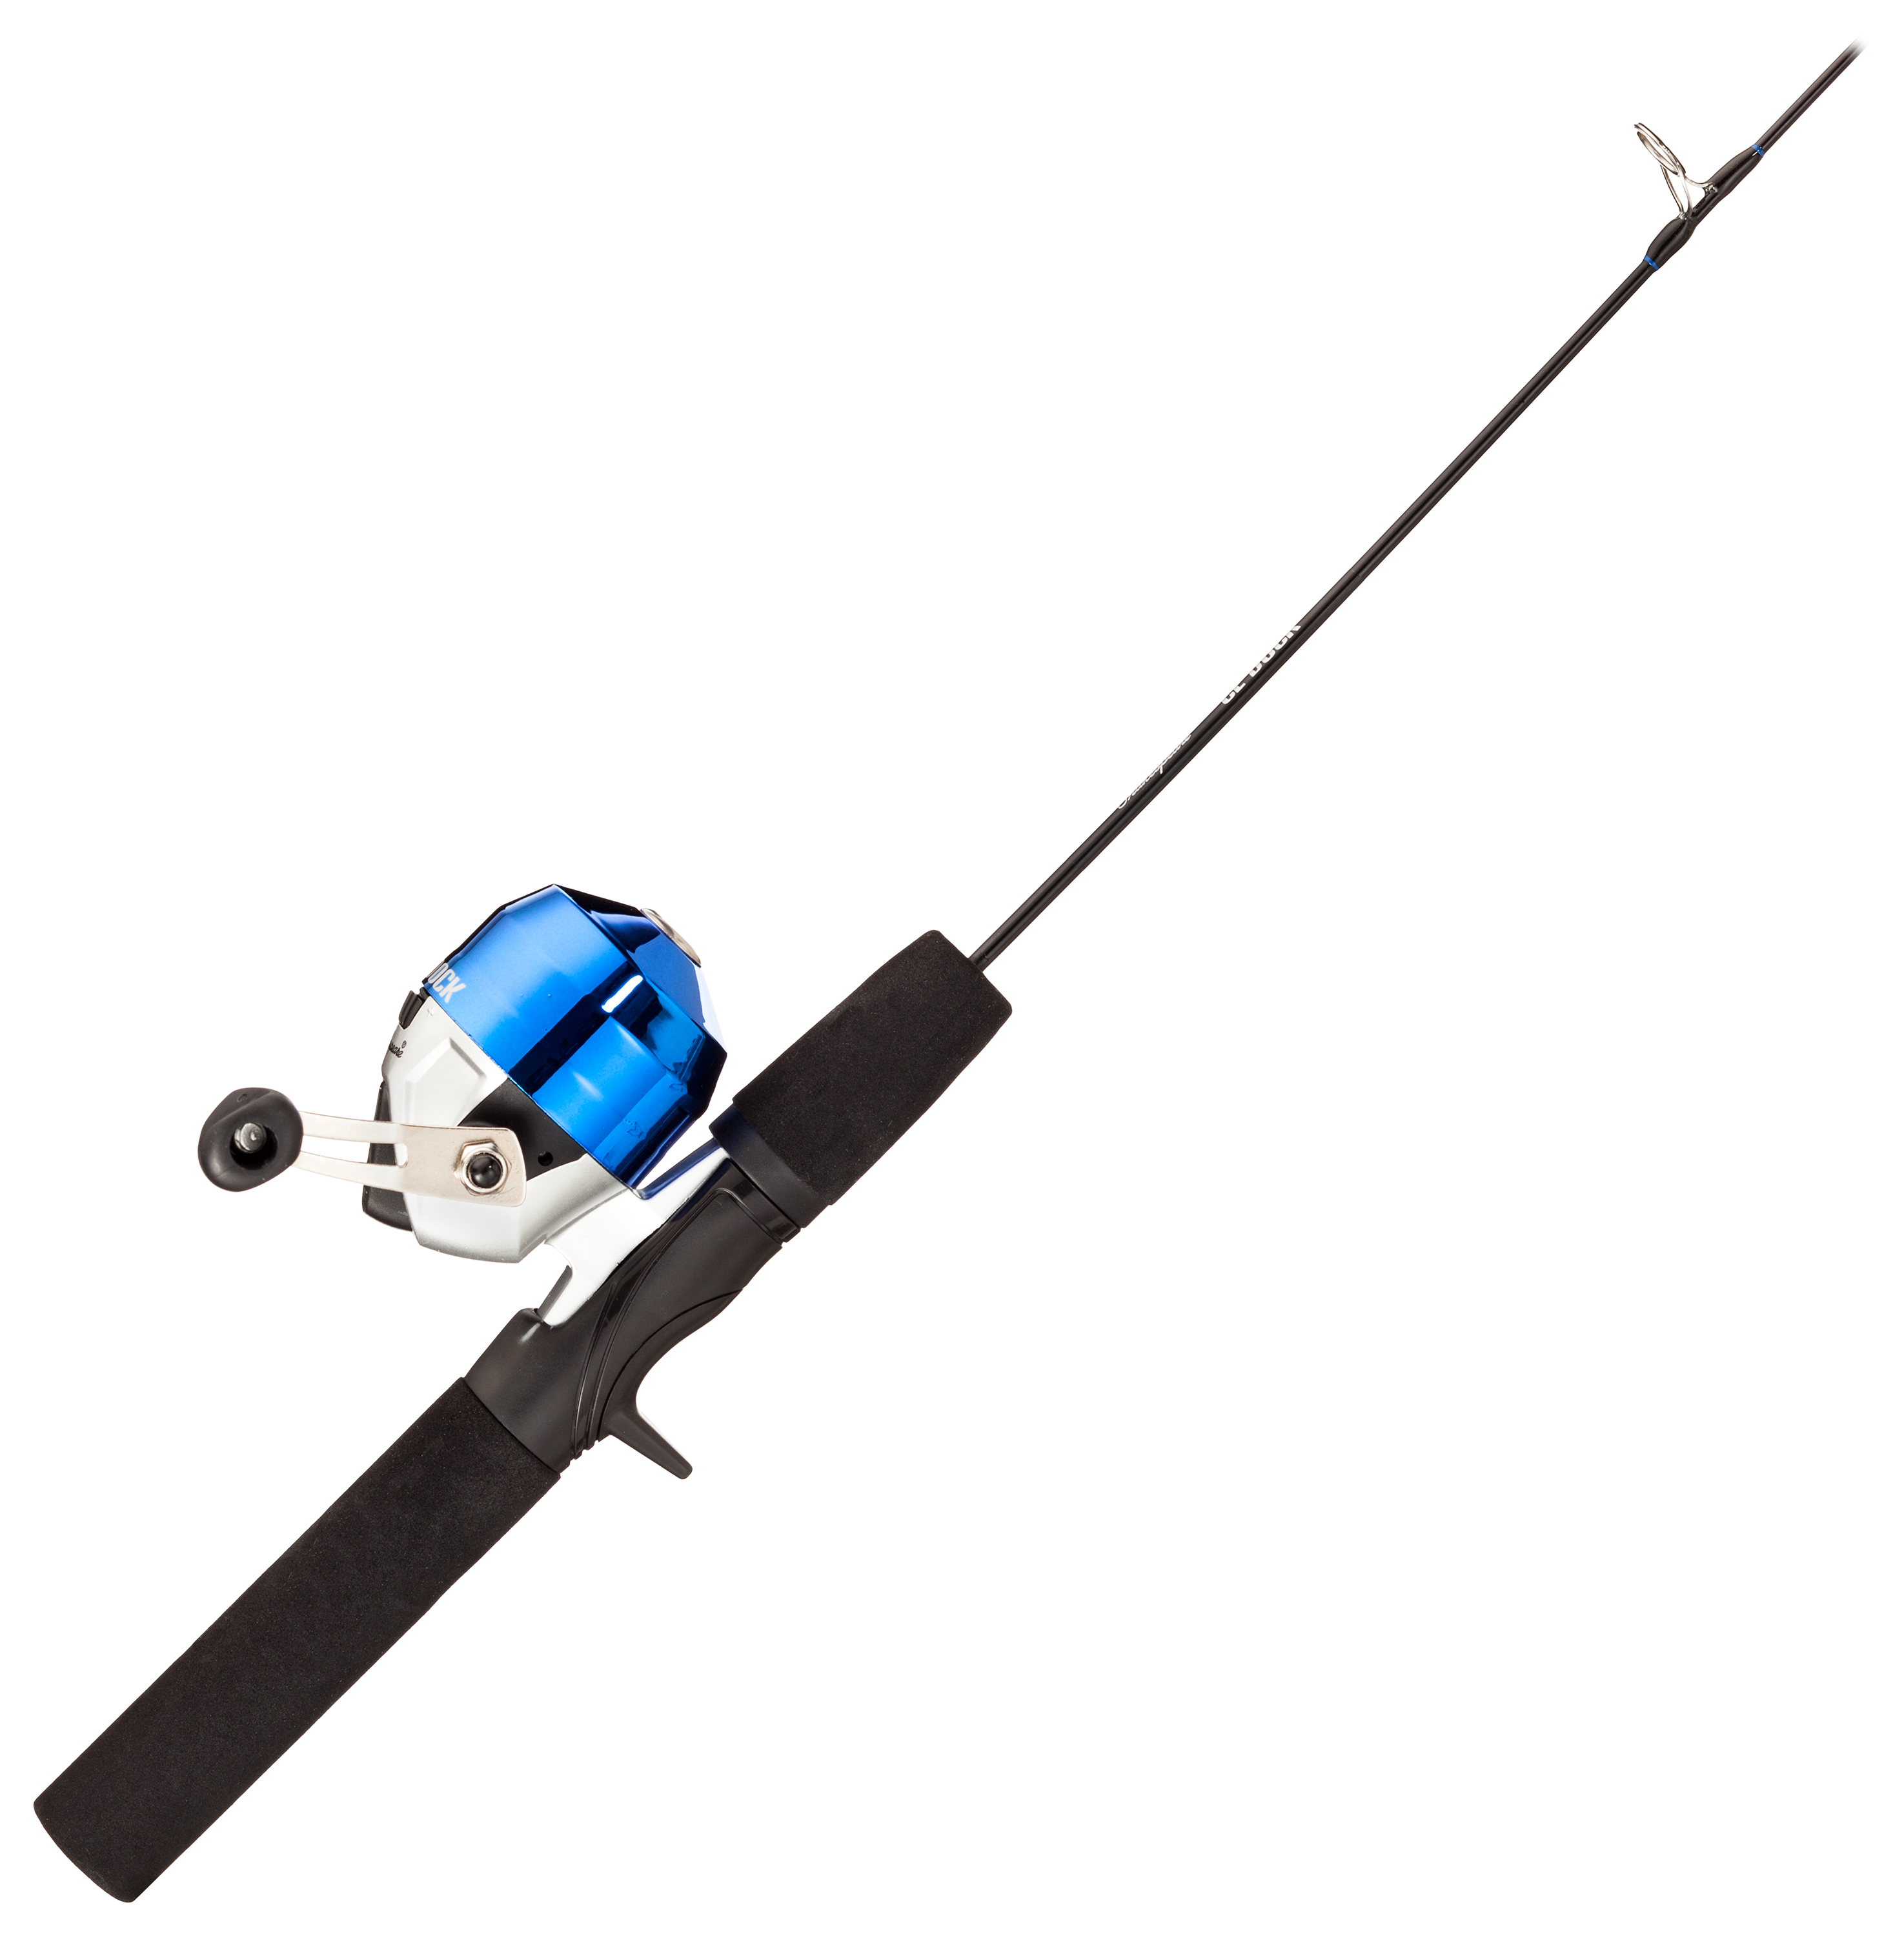 Shakespeare CE Dock Rod and Reel Spincast Combo - Blue